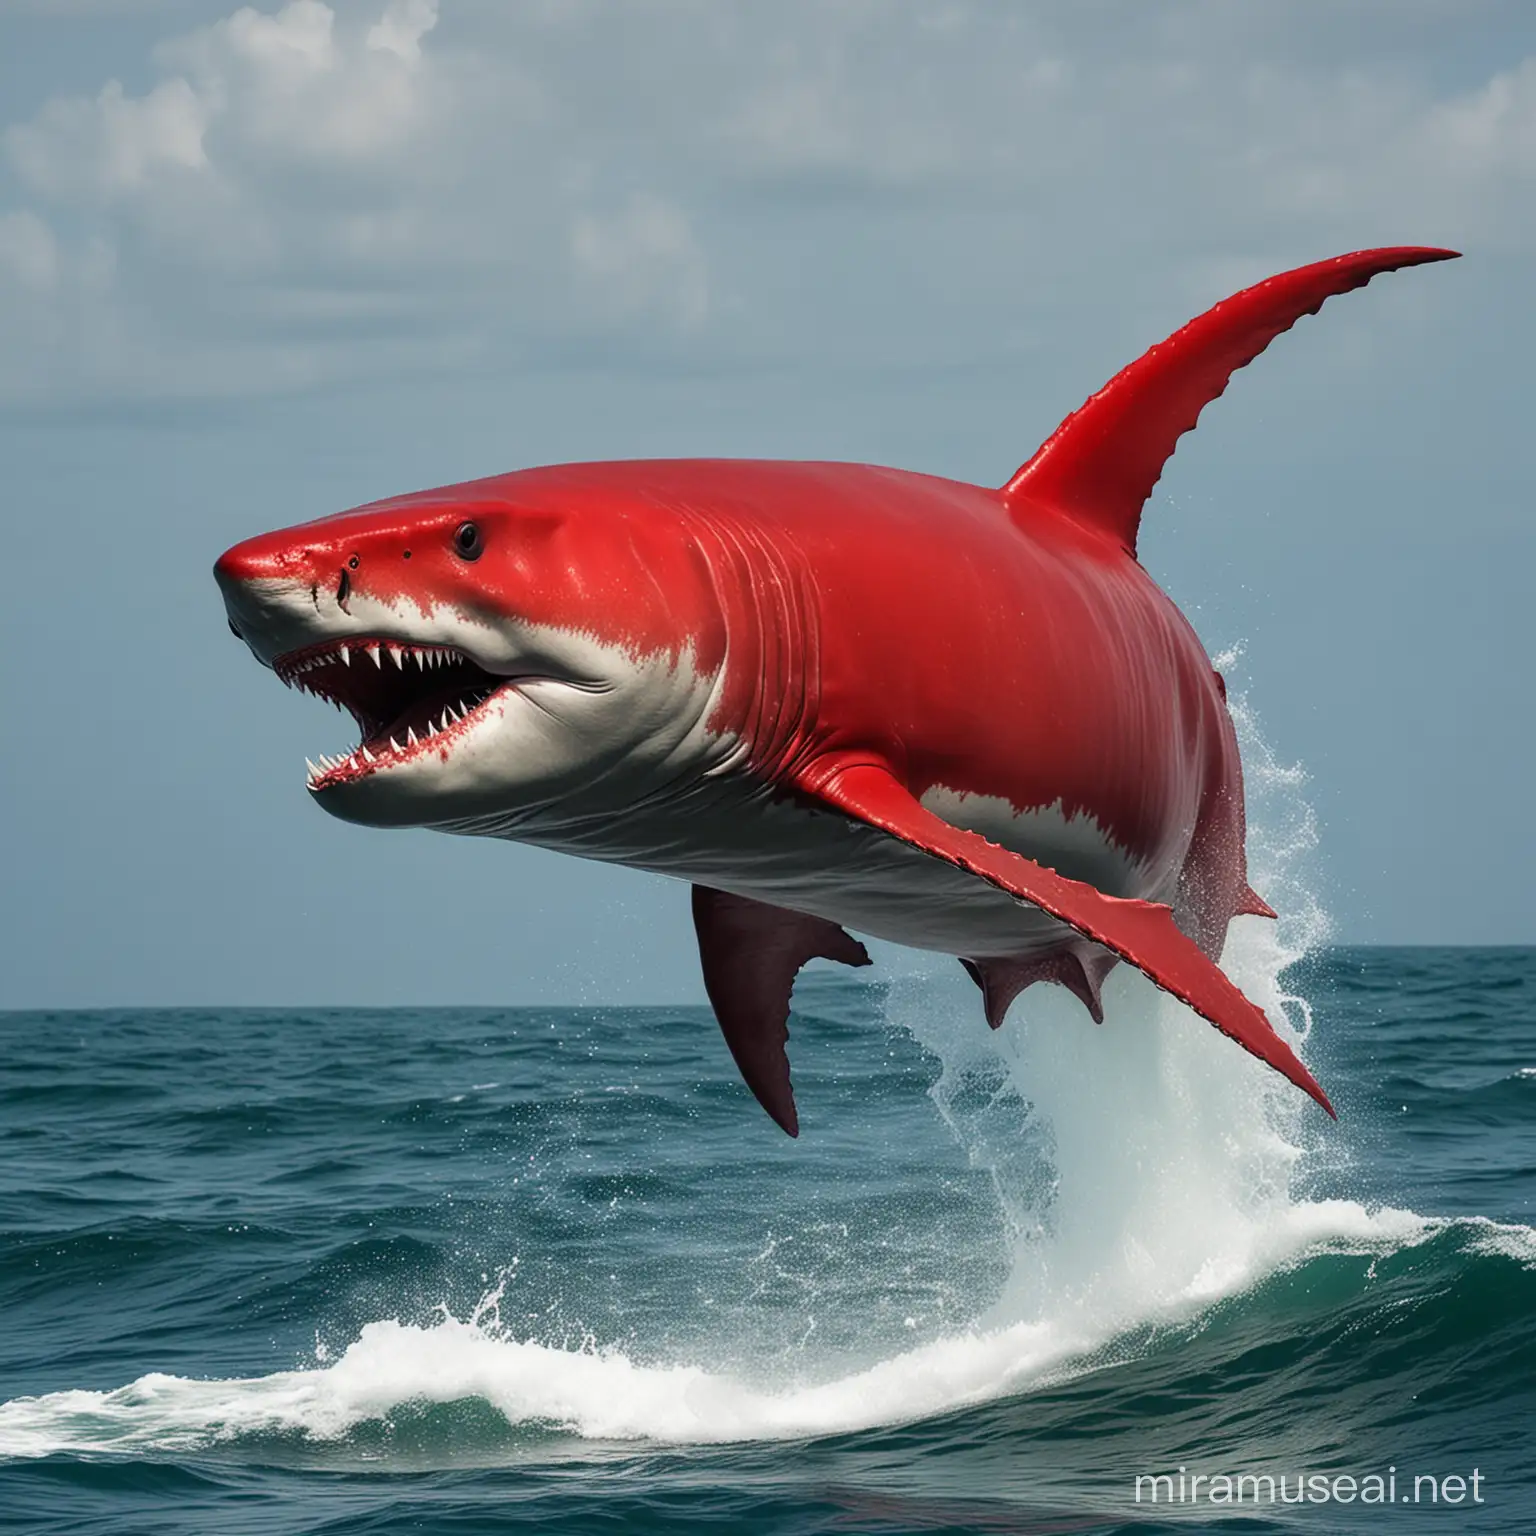 Super cool red megalodon jumping out the sea